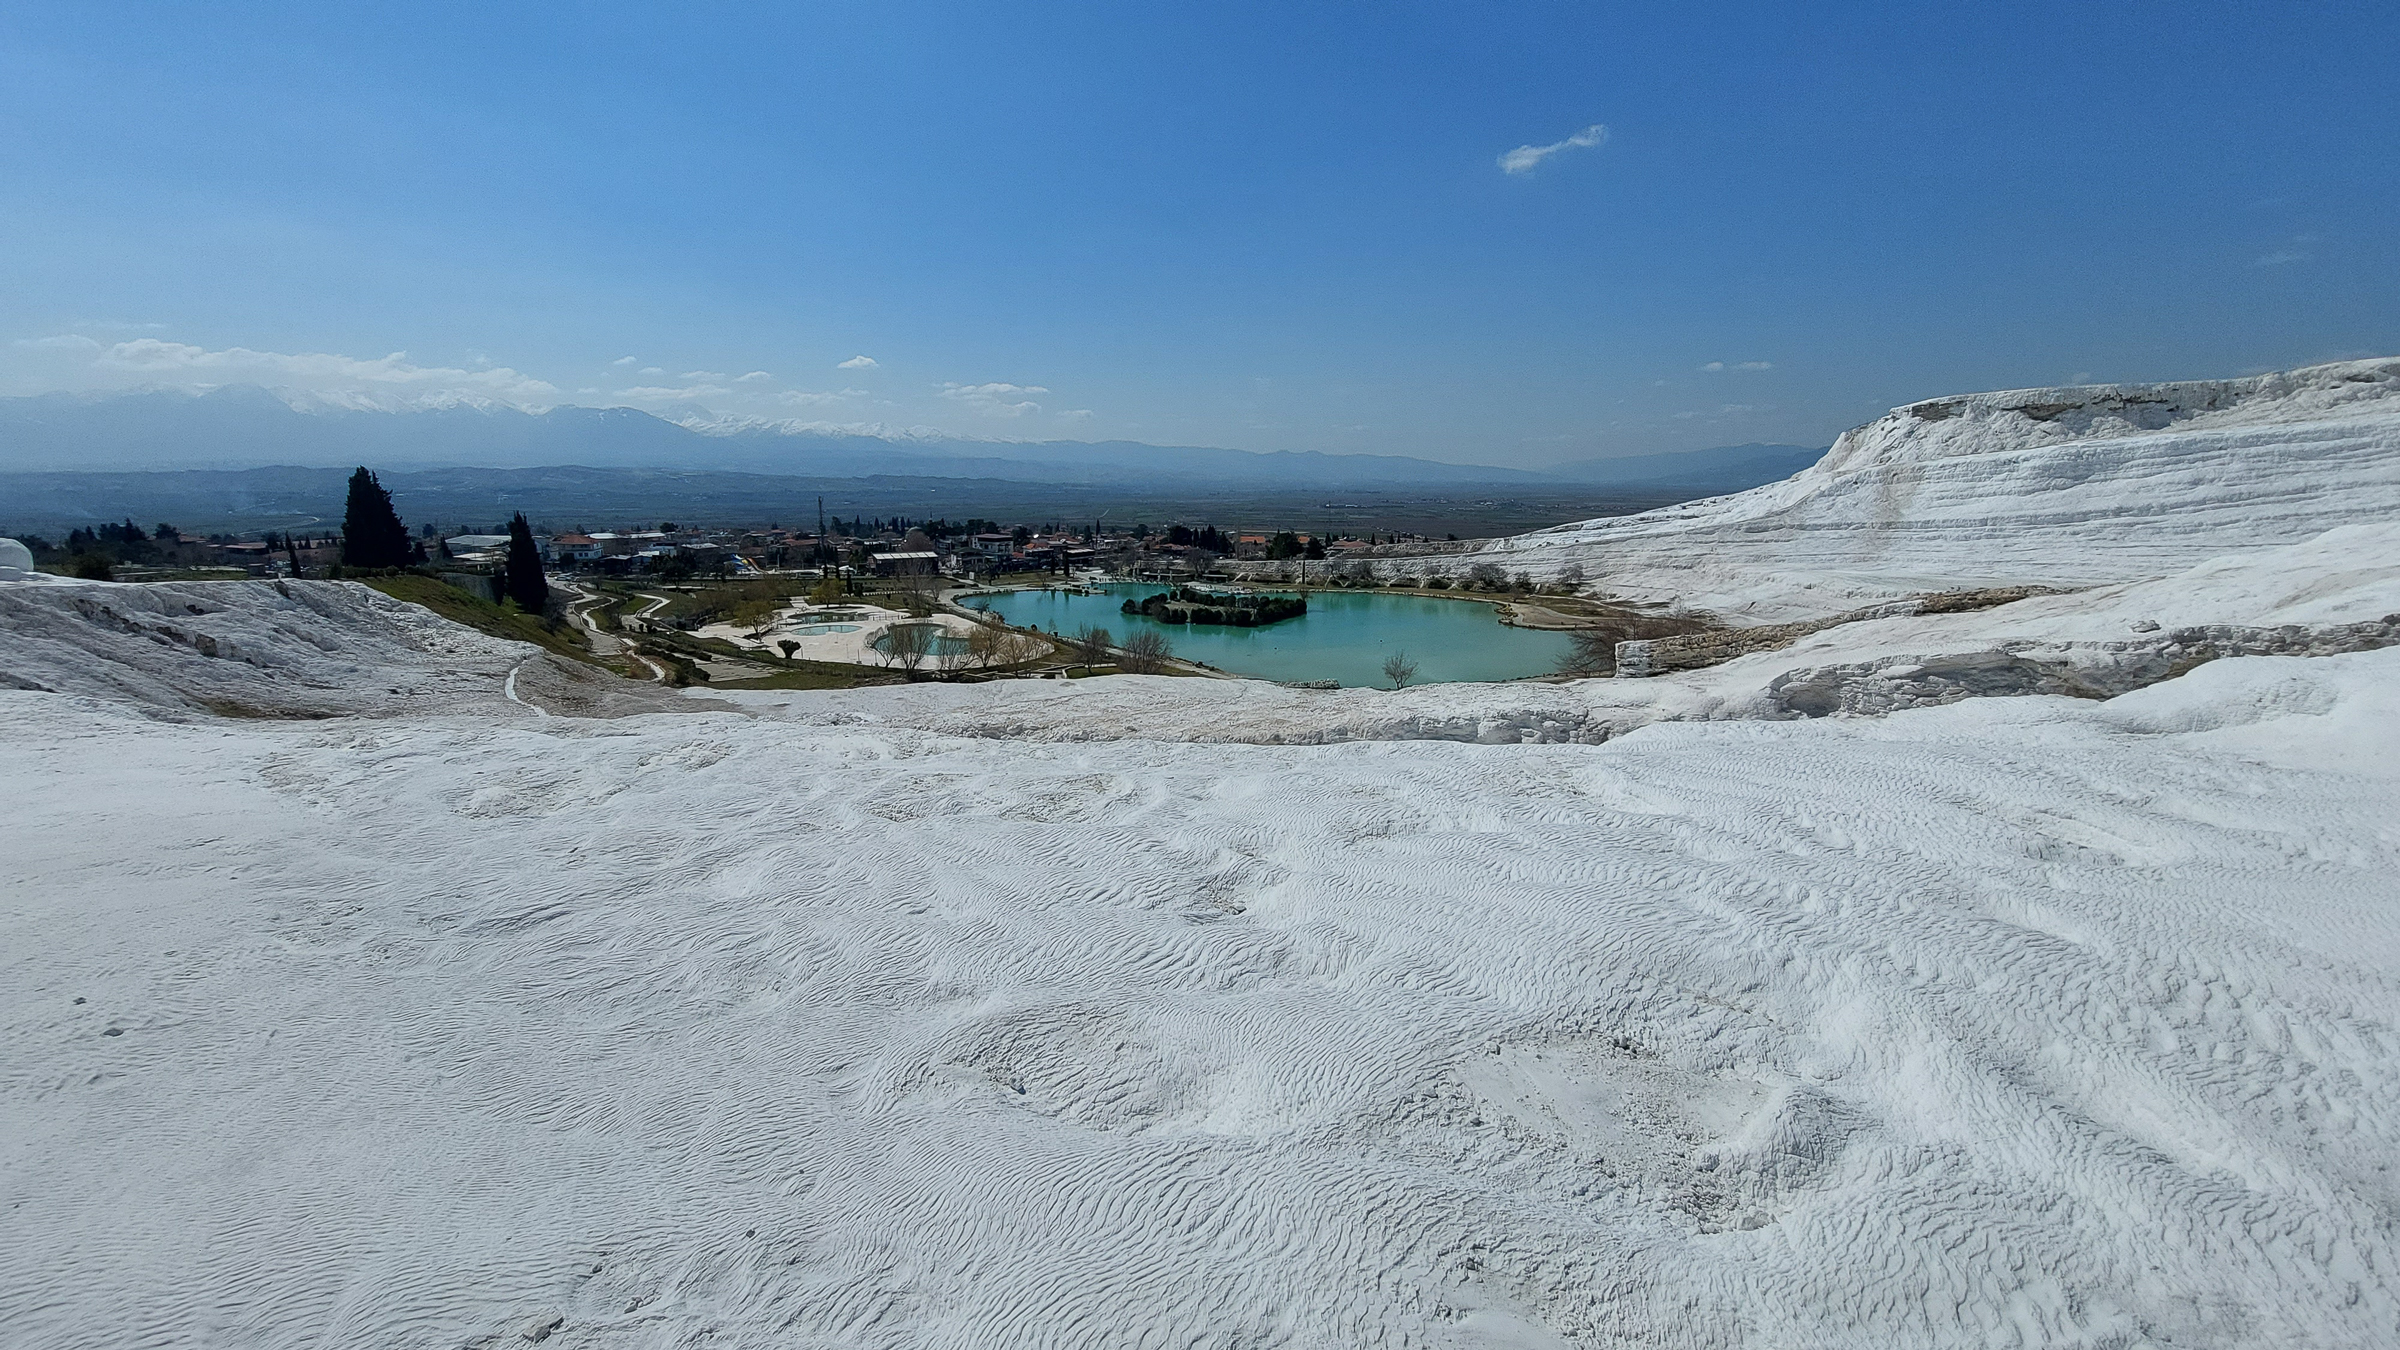 <span  class="uc_style_uc_tiles_grid_image_elementor_uc_items_attribute_title" style="color:#FFFFFF;">Pamukkale</span>